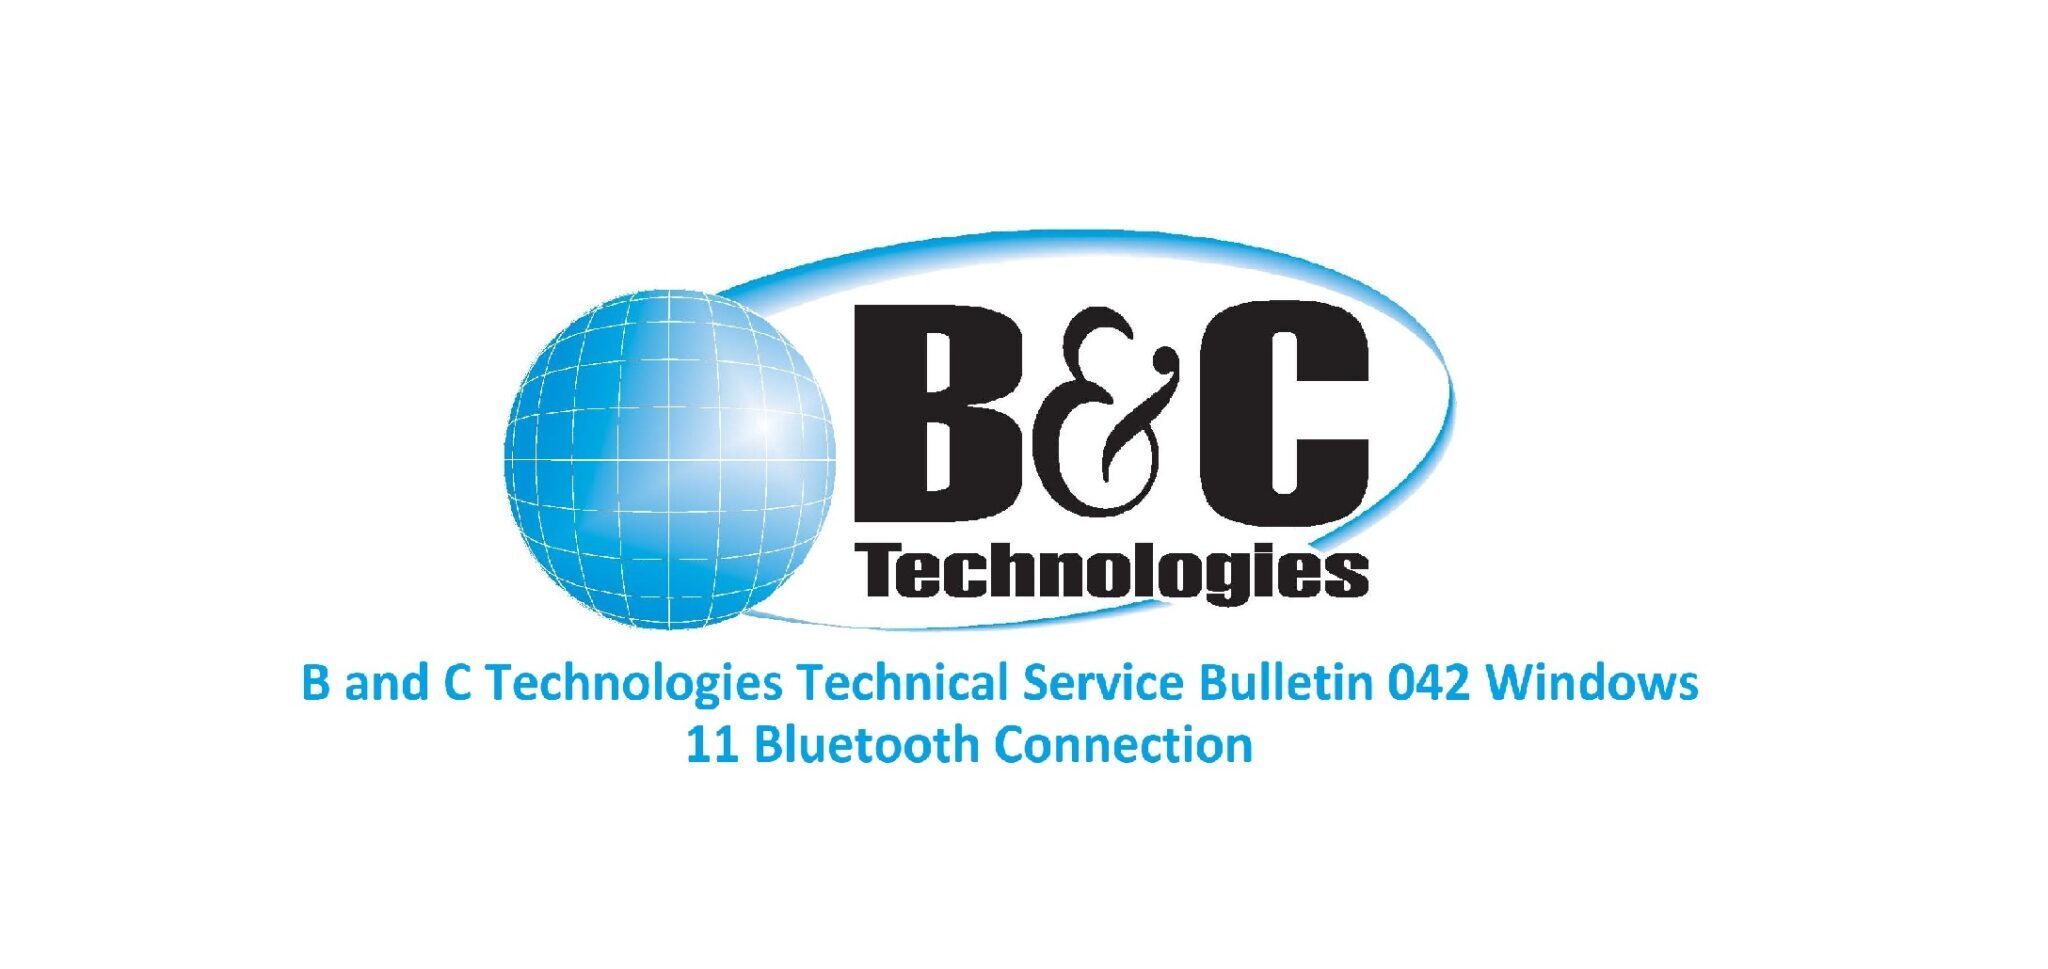 B and C Technologies Technical Service Bulletin 042 Windows 11 Bluetooth Connection